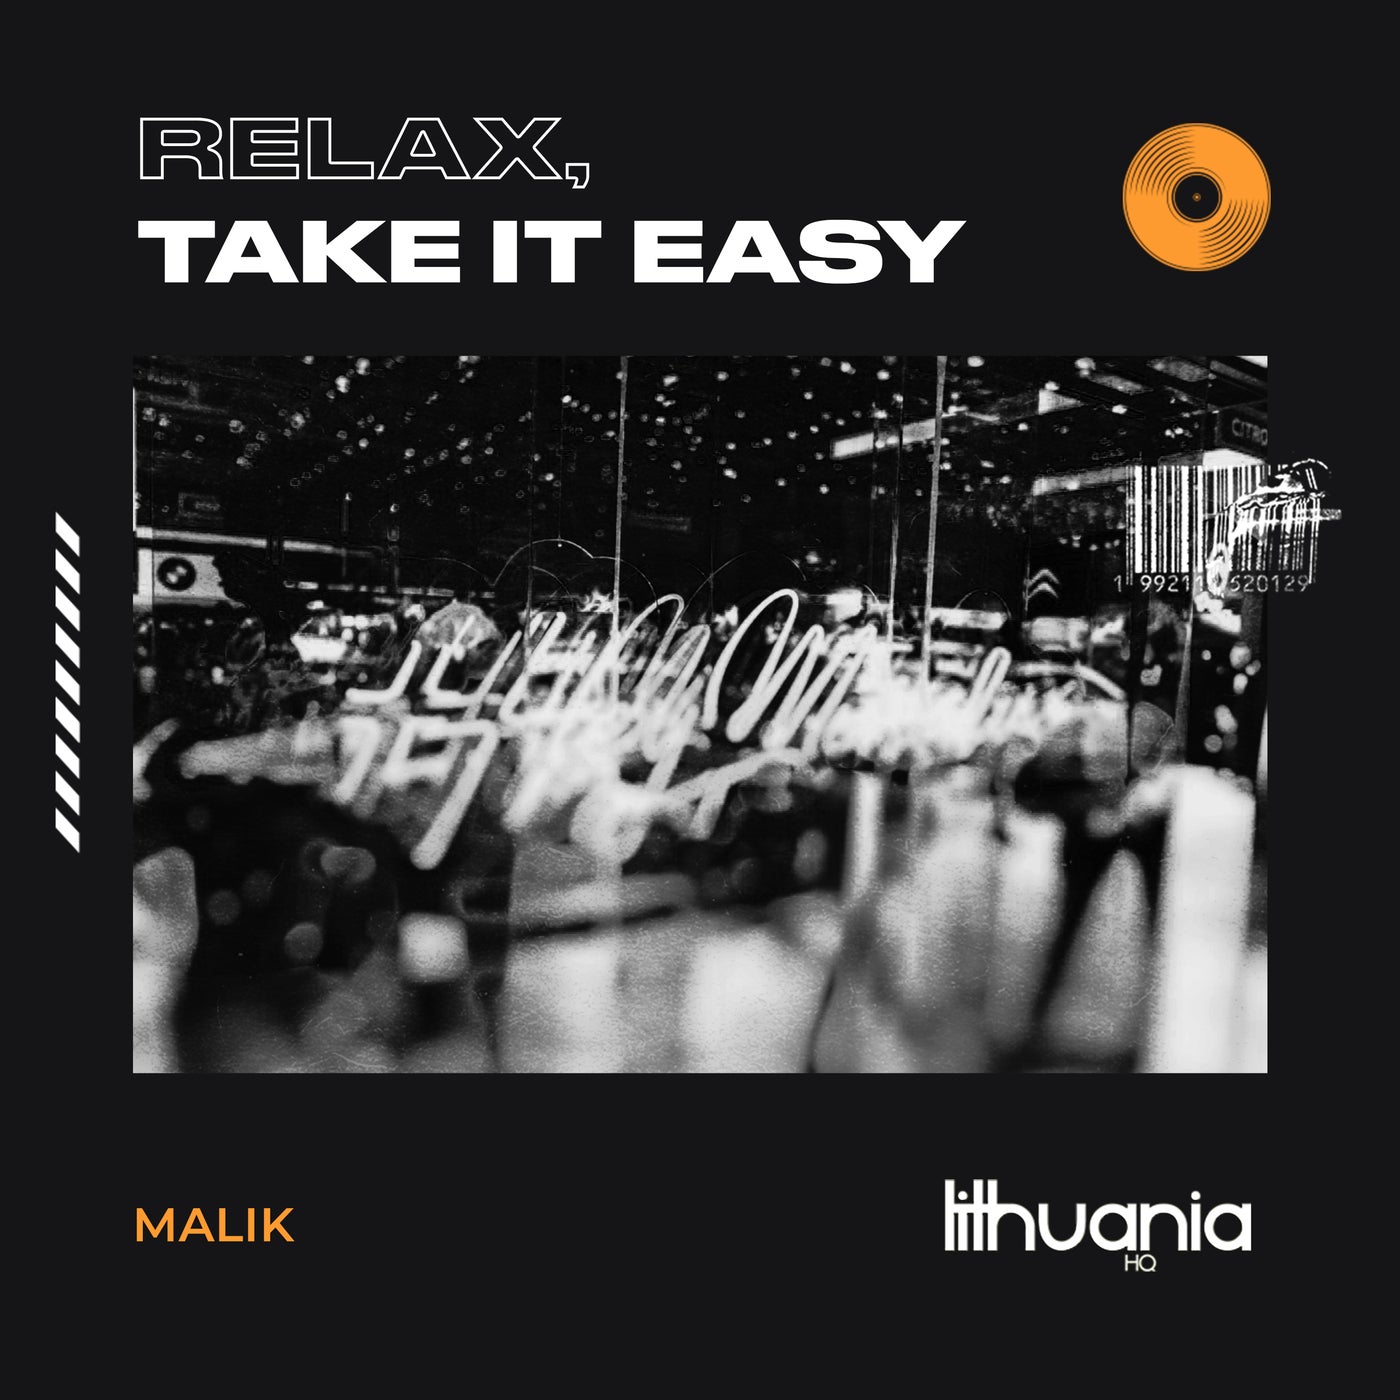 Relax, Take It Easy